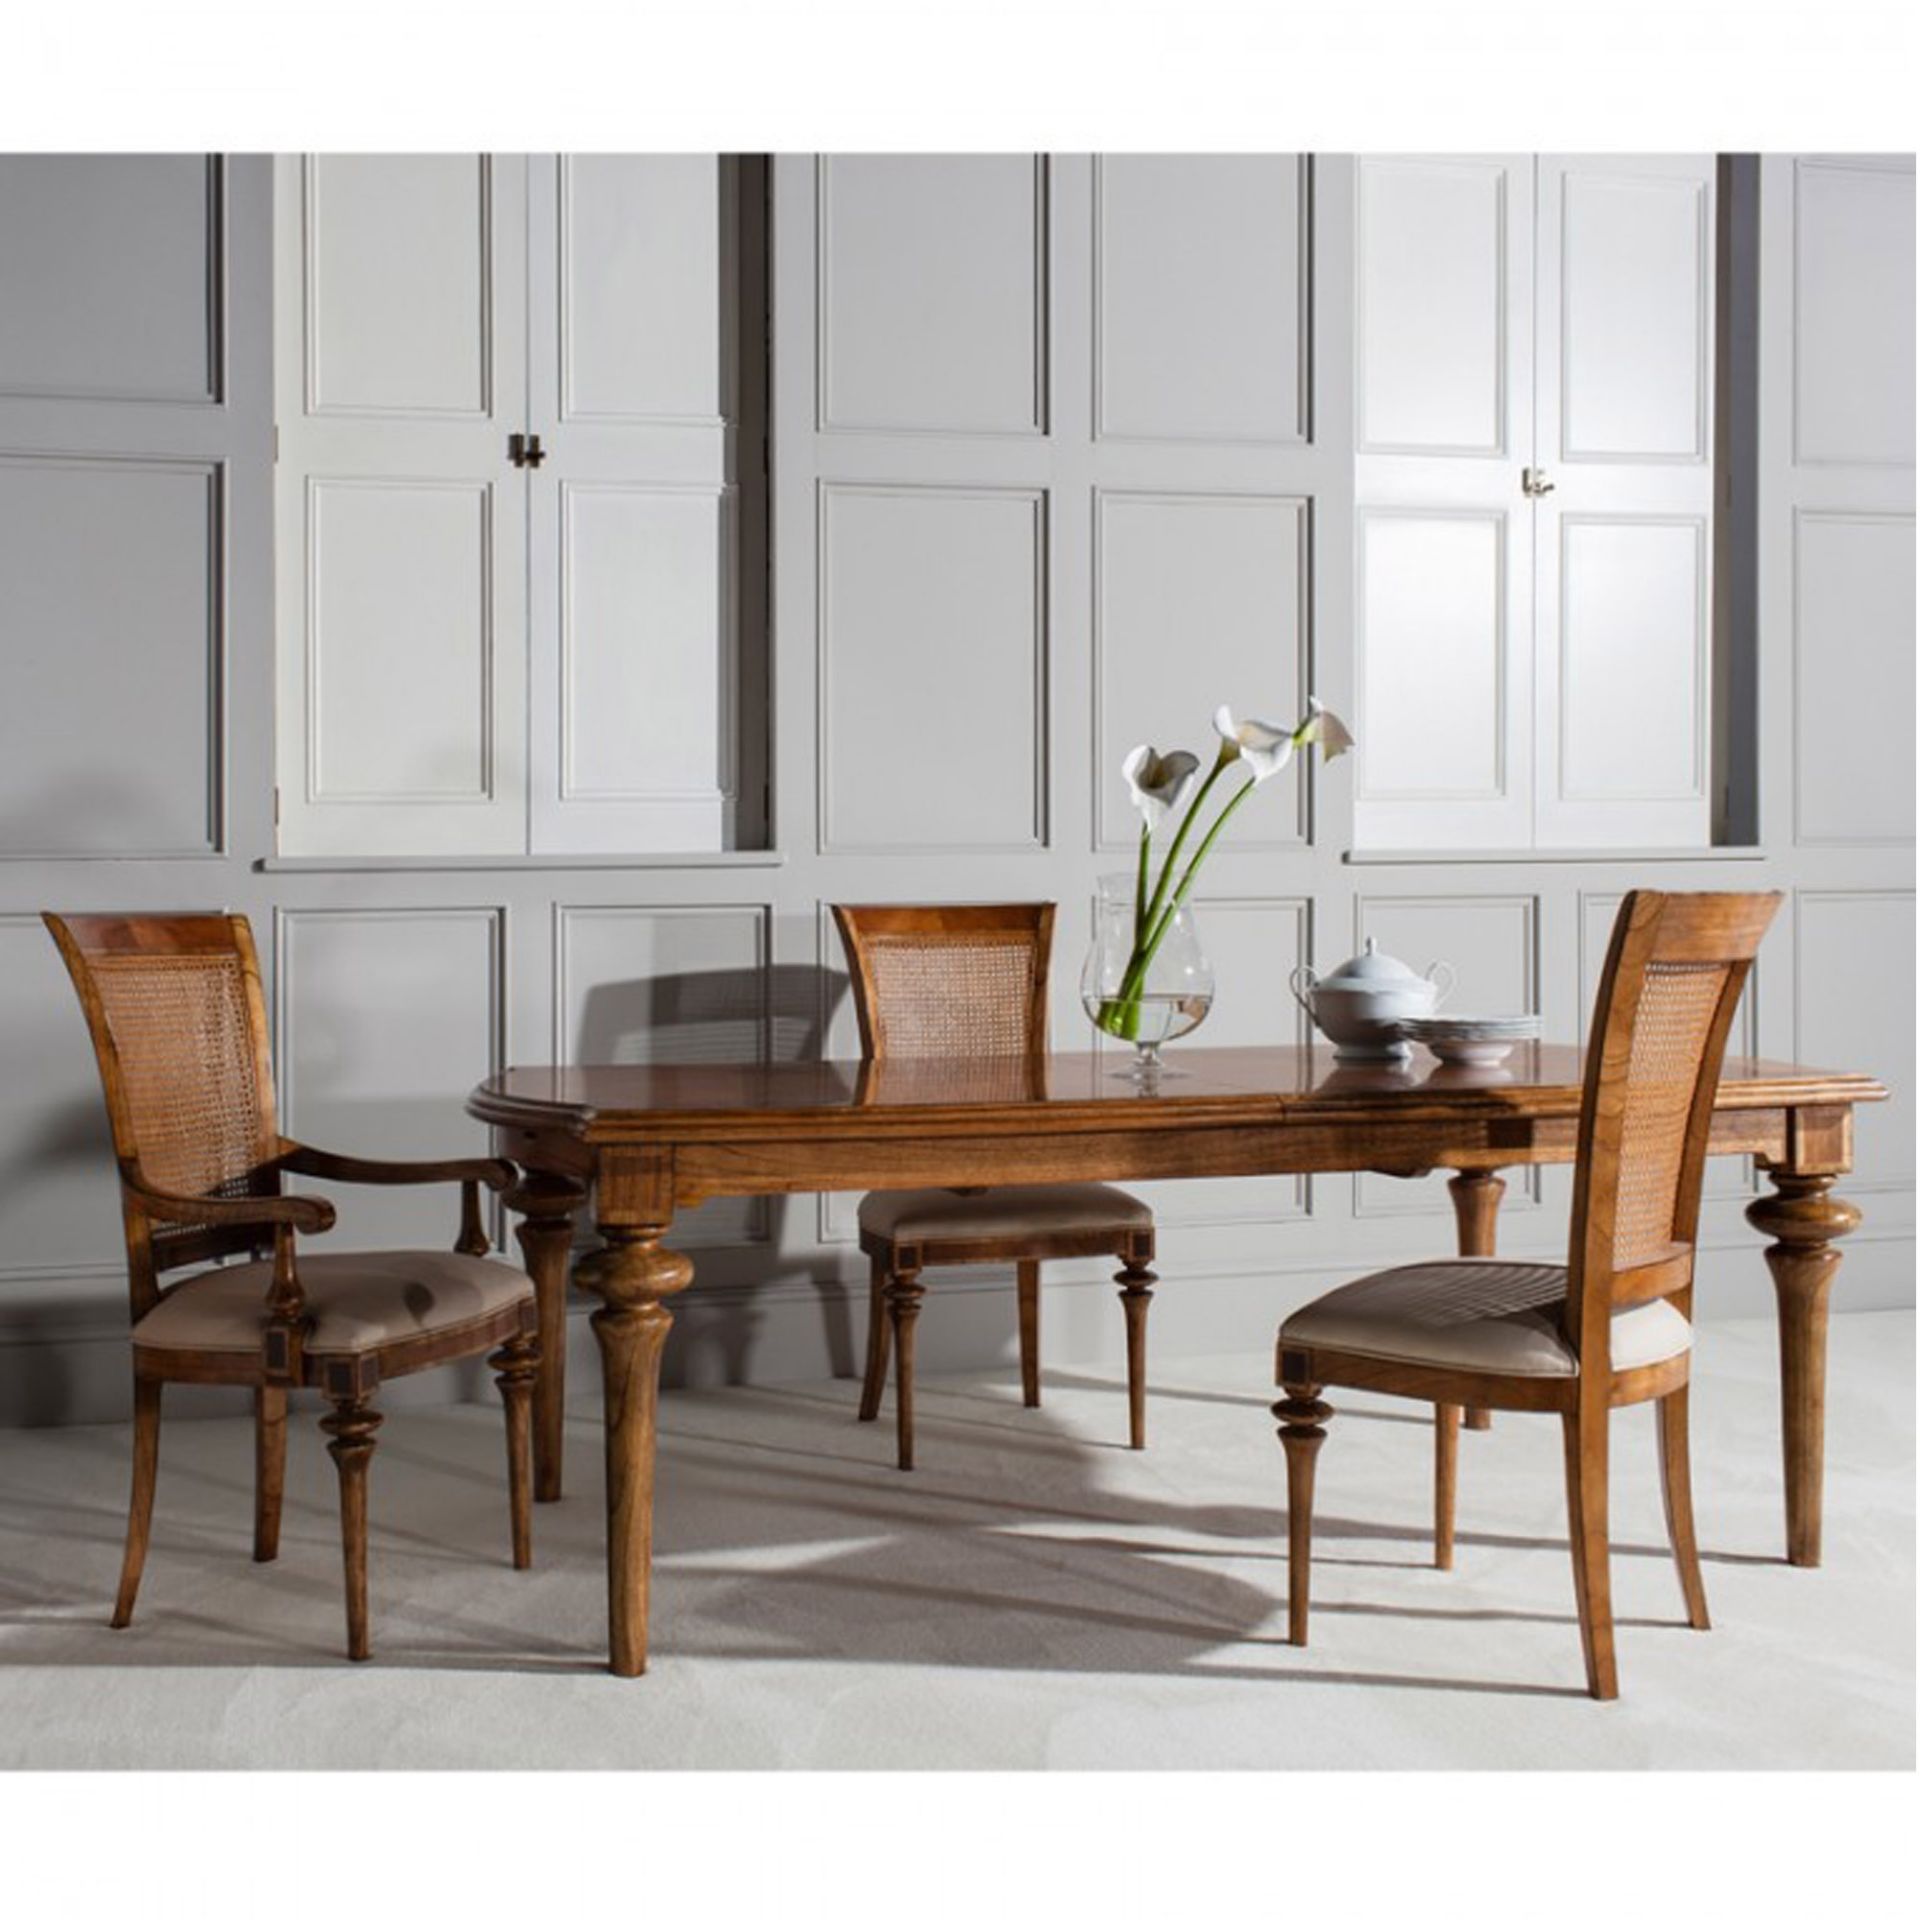 Spire Dining Large Extending Table Blonde European walnut with intricate inlays, antiqued hand wax